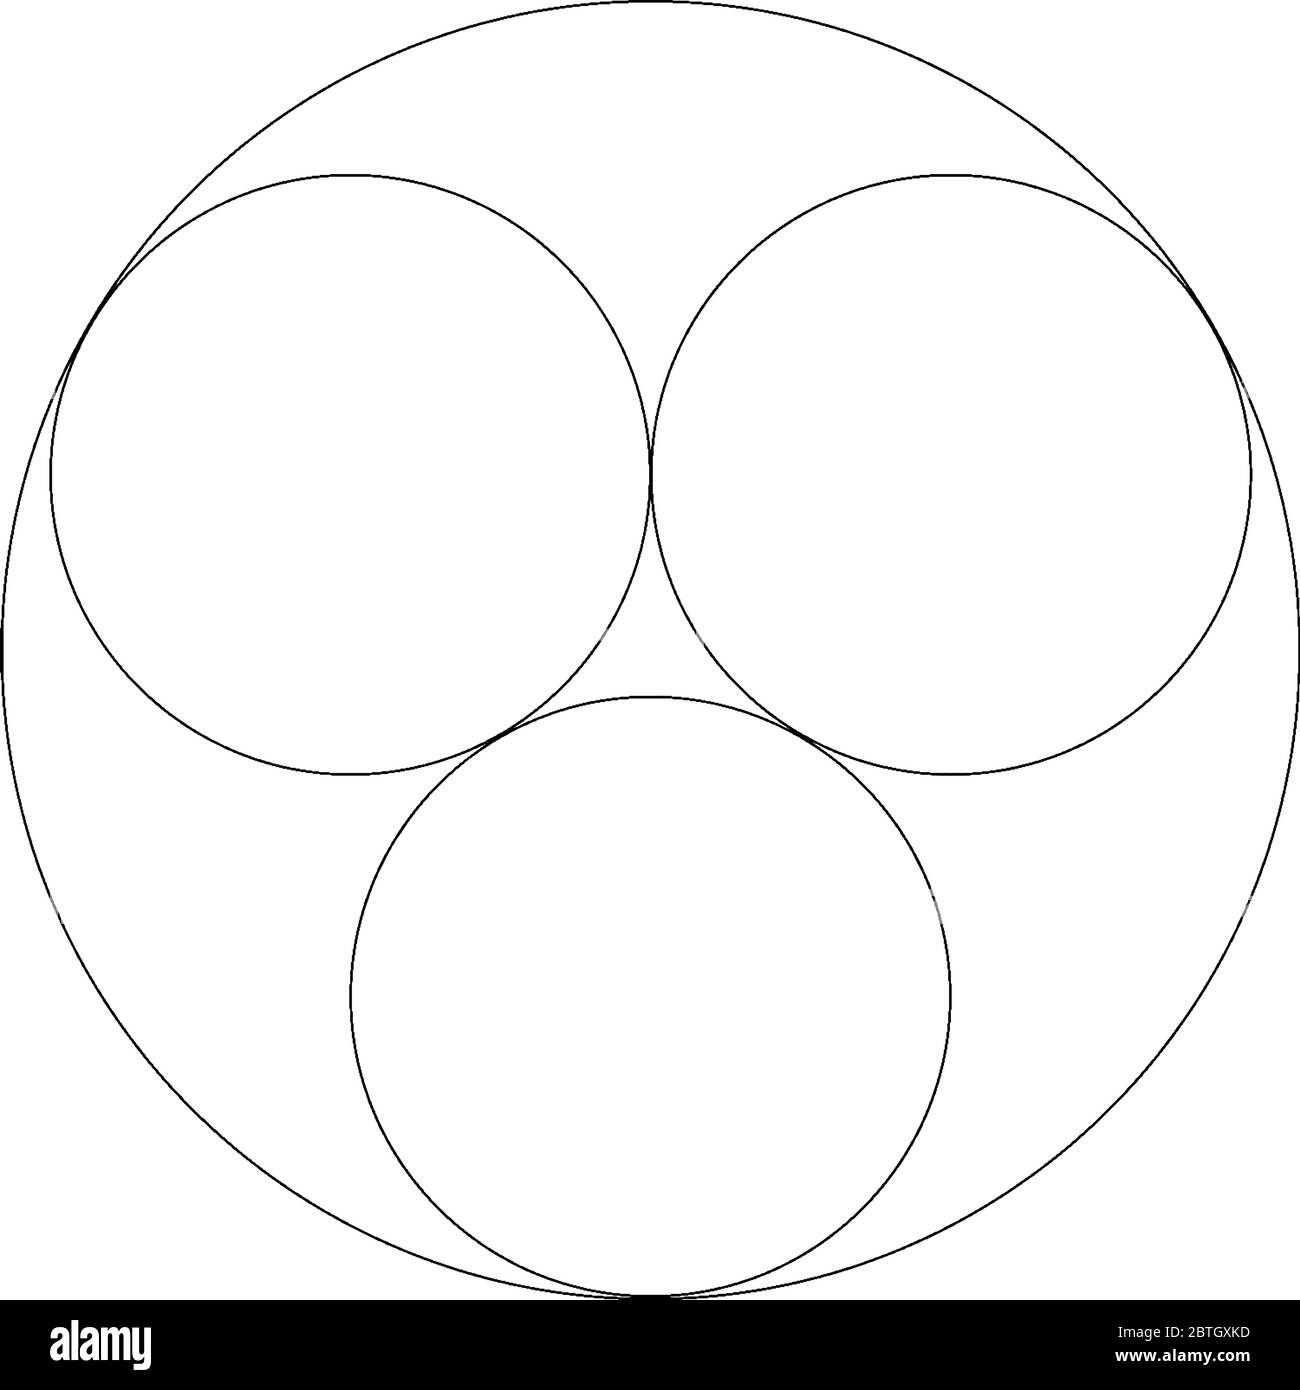 Circle The Shape That Is Bigger Or Smaller 3